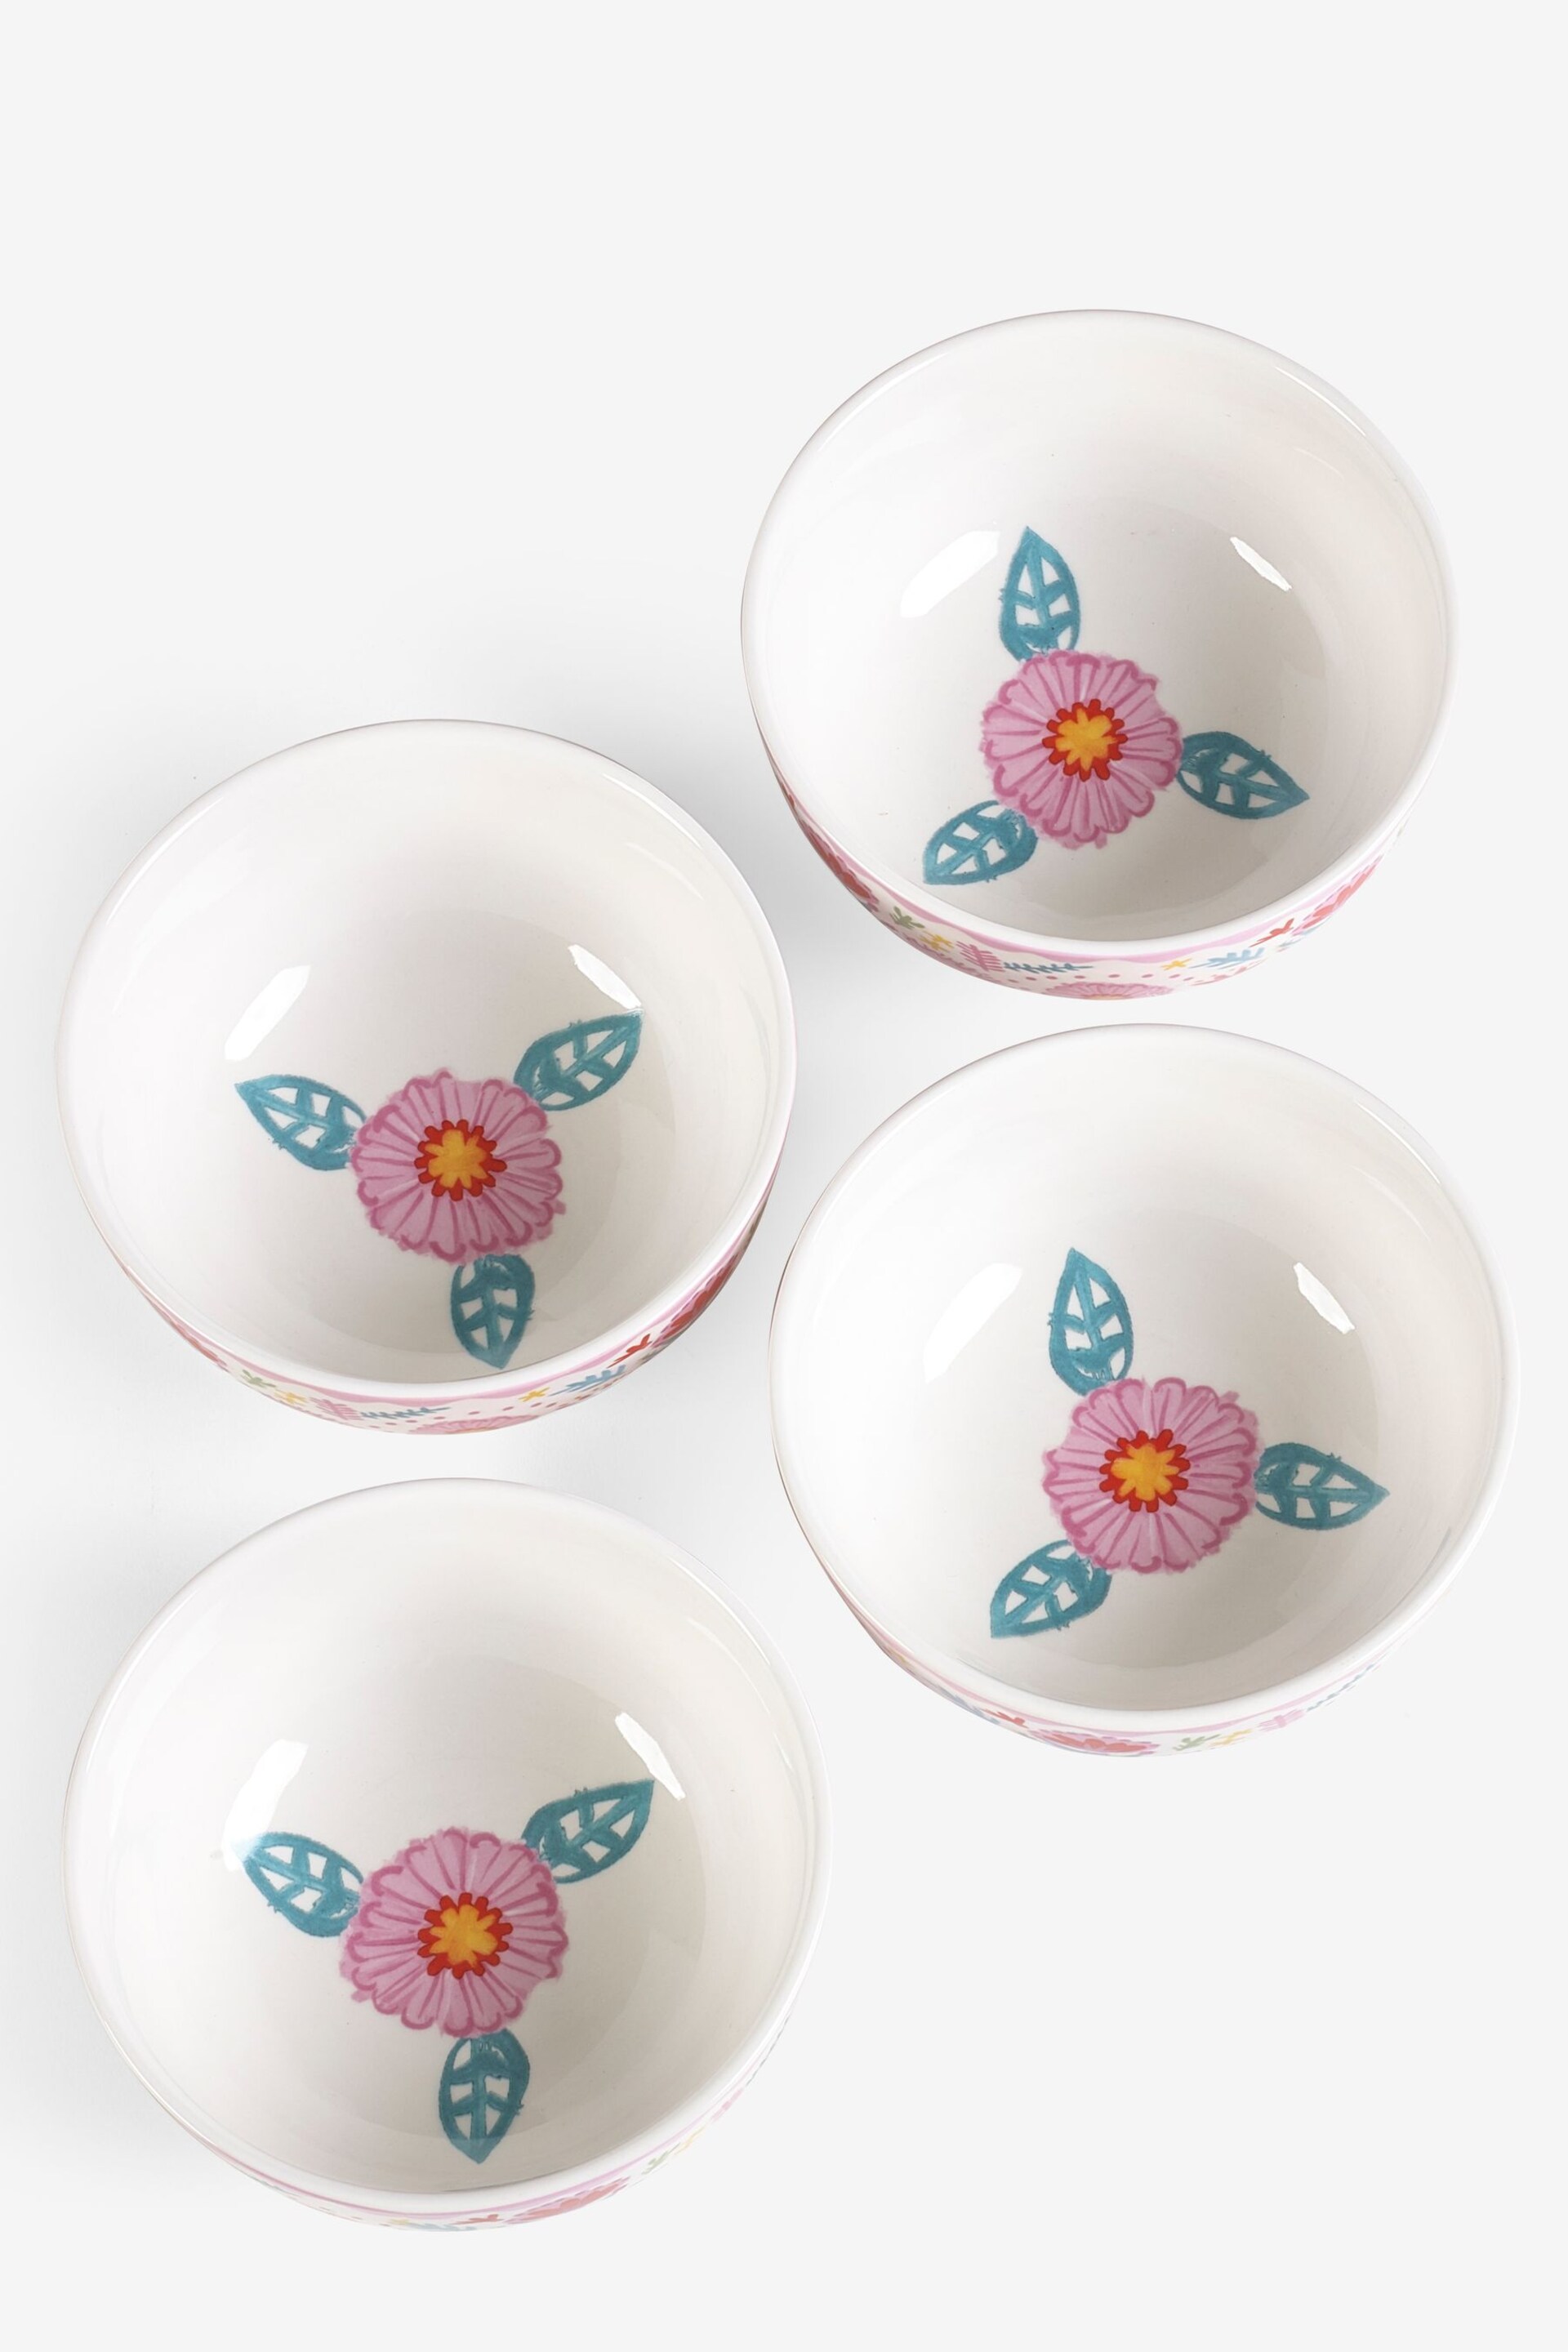 Lucy Tiffney Set of 4 Floral Cereal Bowls - Image 6 of 6